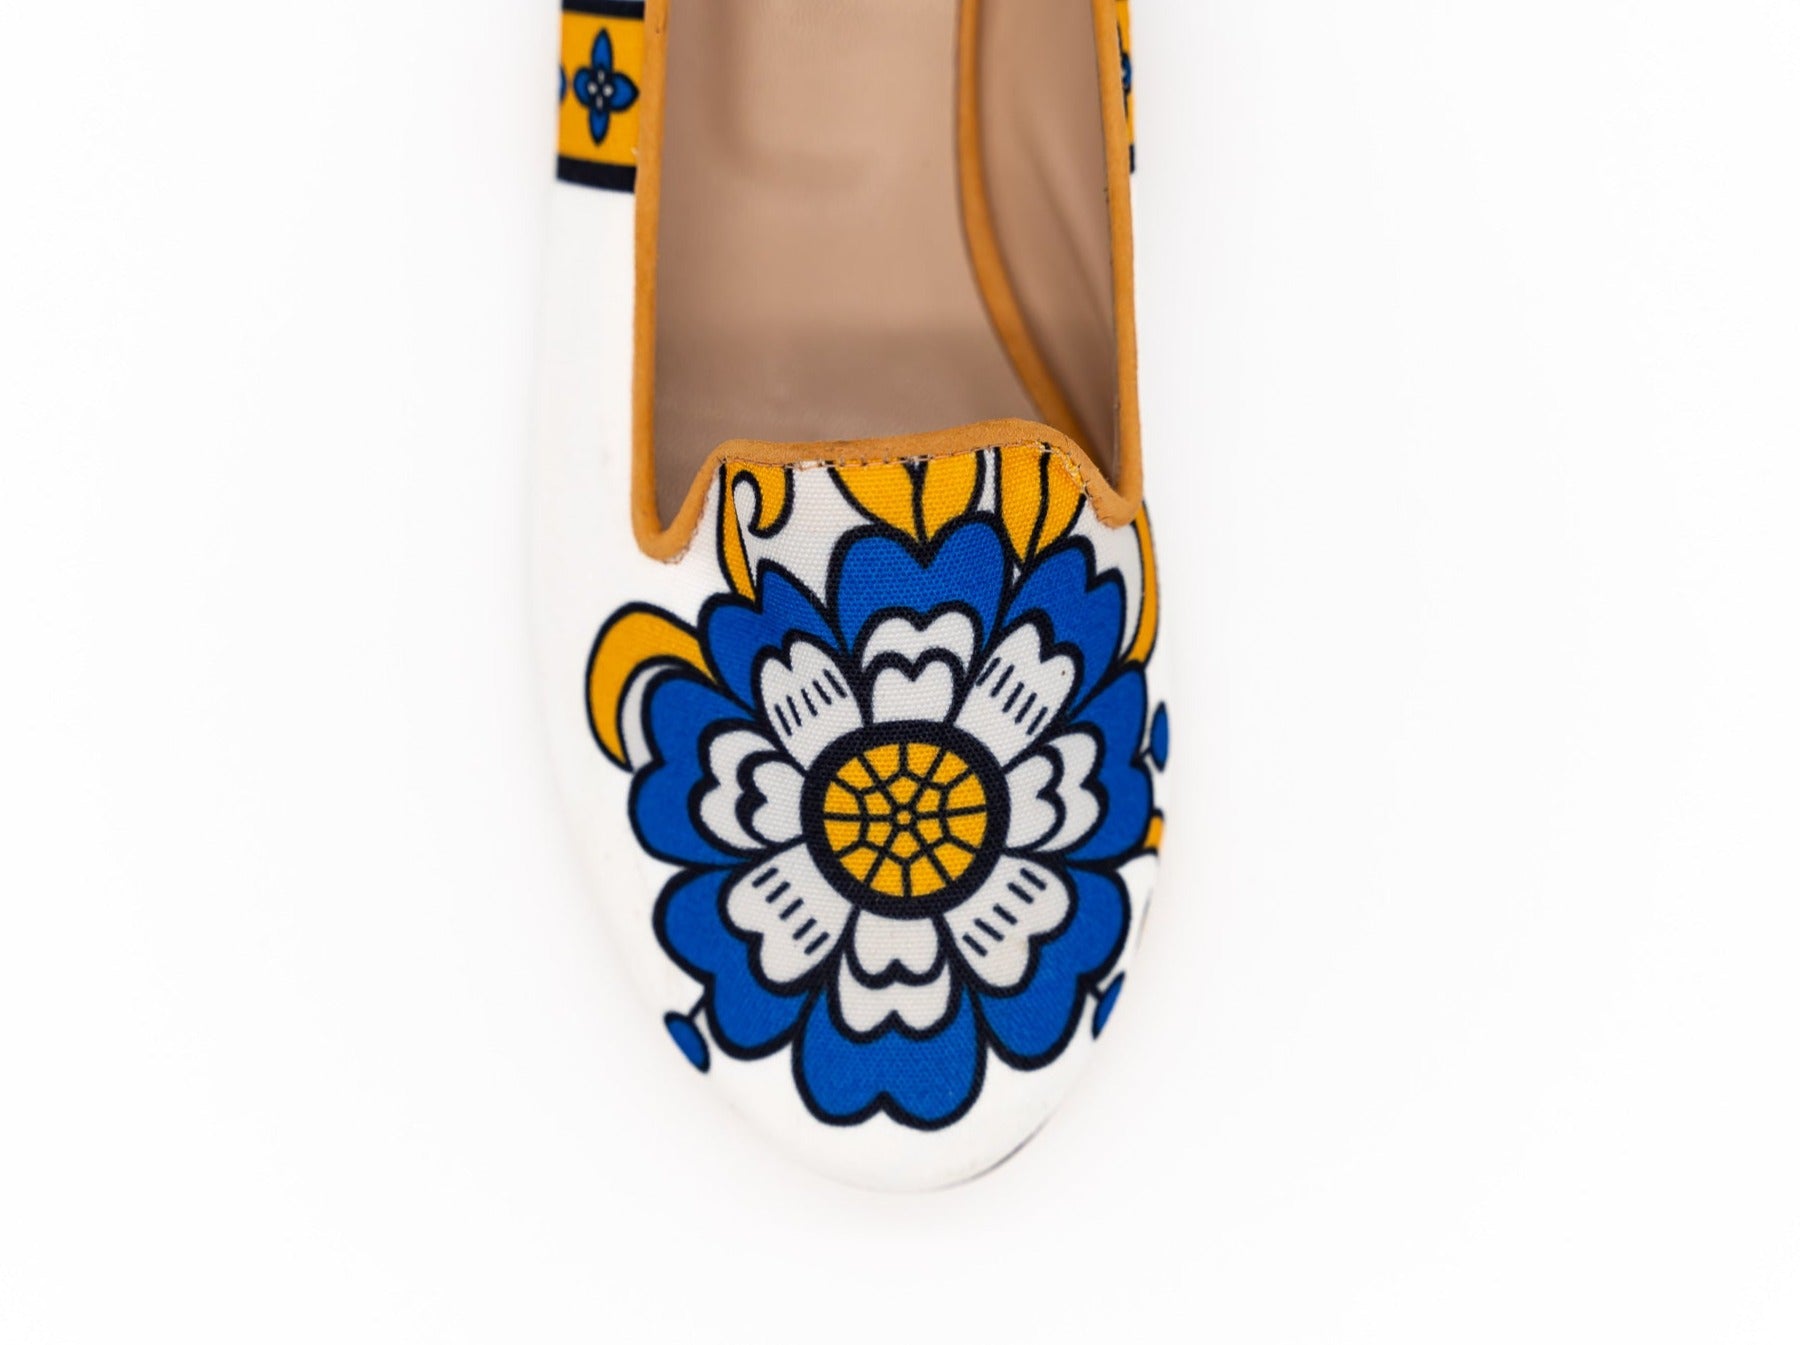 Made in Italy Ballerina Flat Shoes for Women